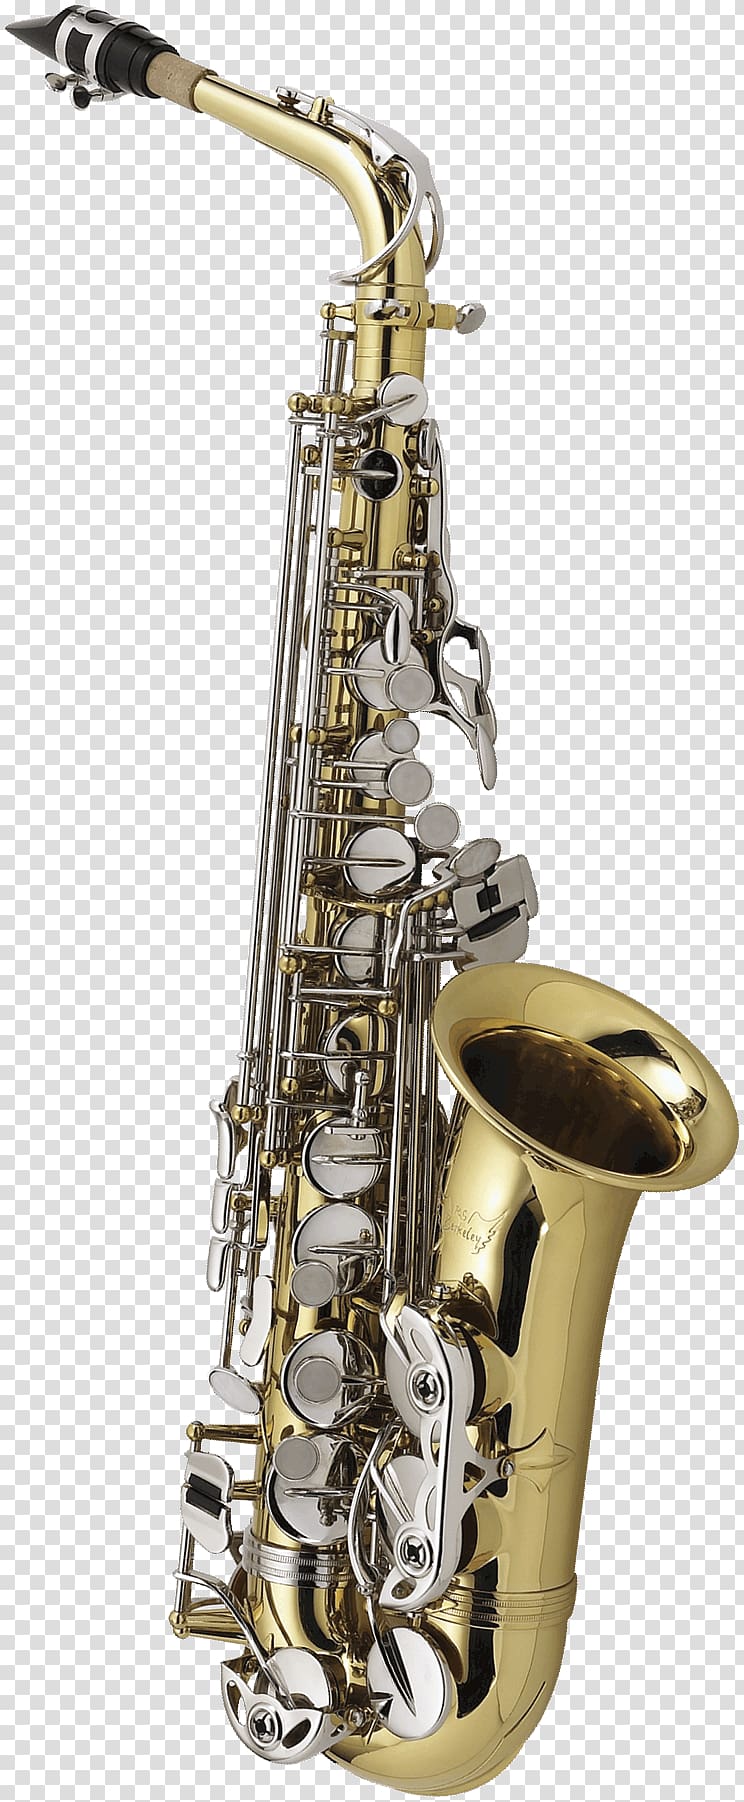 Alto saxophone Musical Instruments Orchestra Yamaha Corporation, trumpet and saxophone transparent background PNG clipart